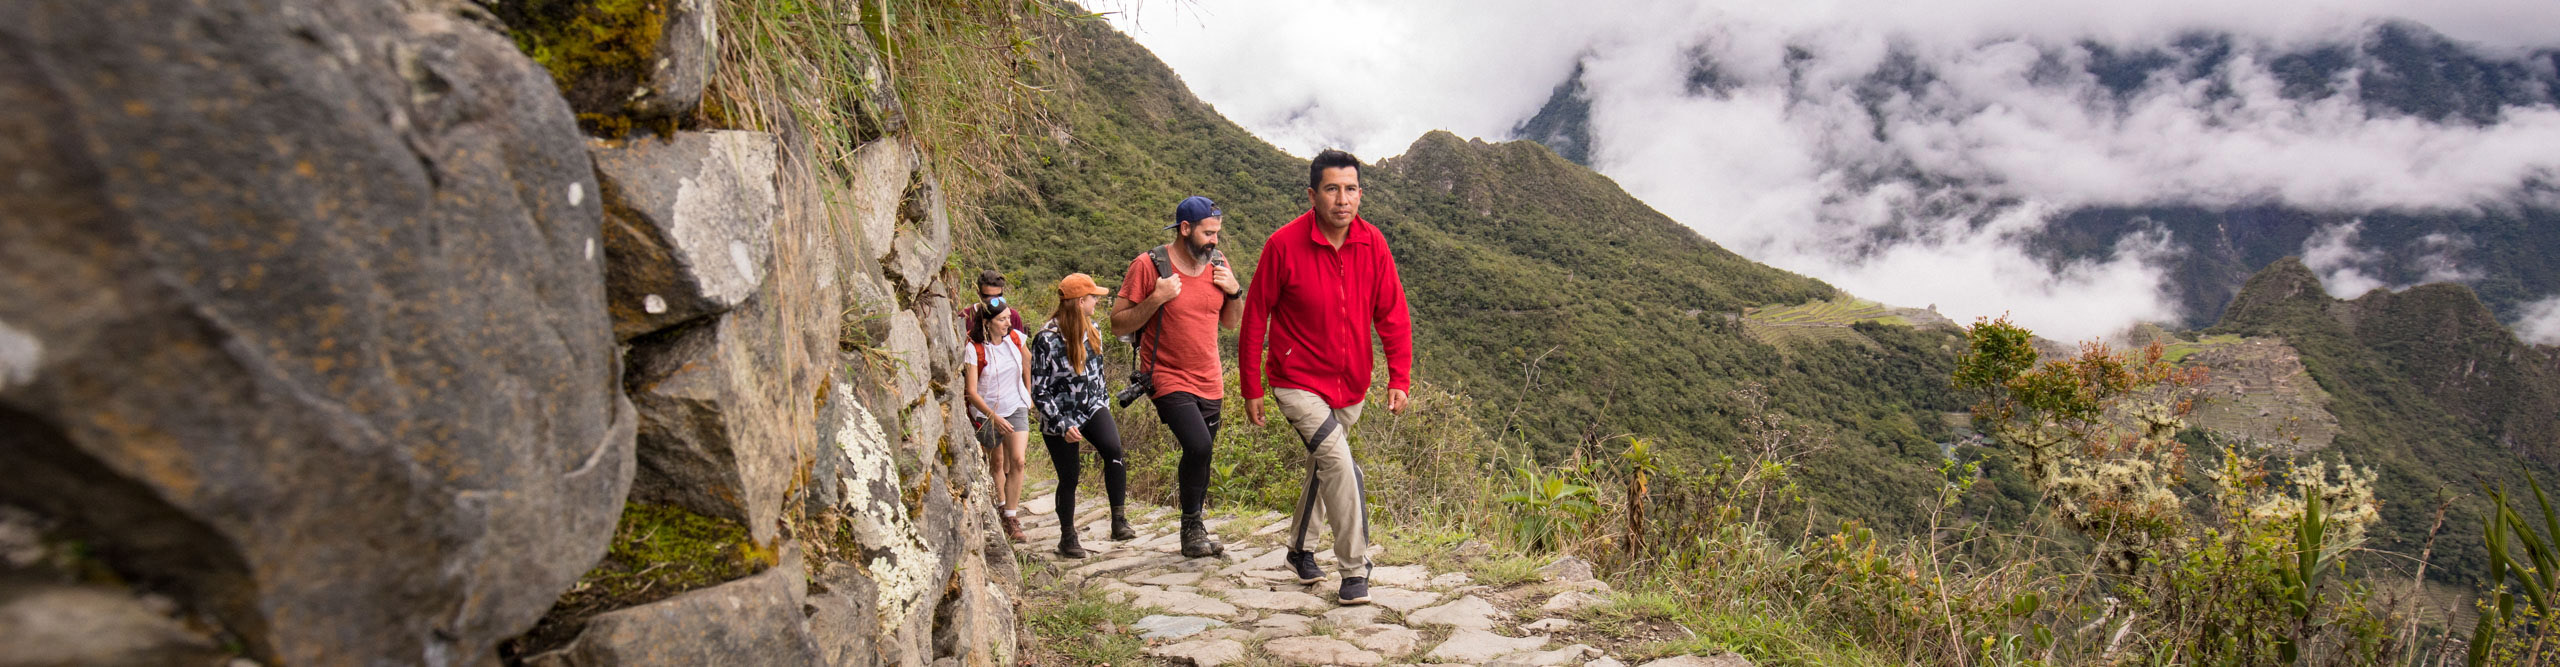 Travellers hiking near Machu Picchu with clouds covering some of the valley, Peru